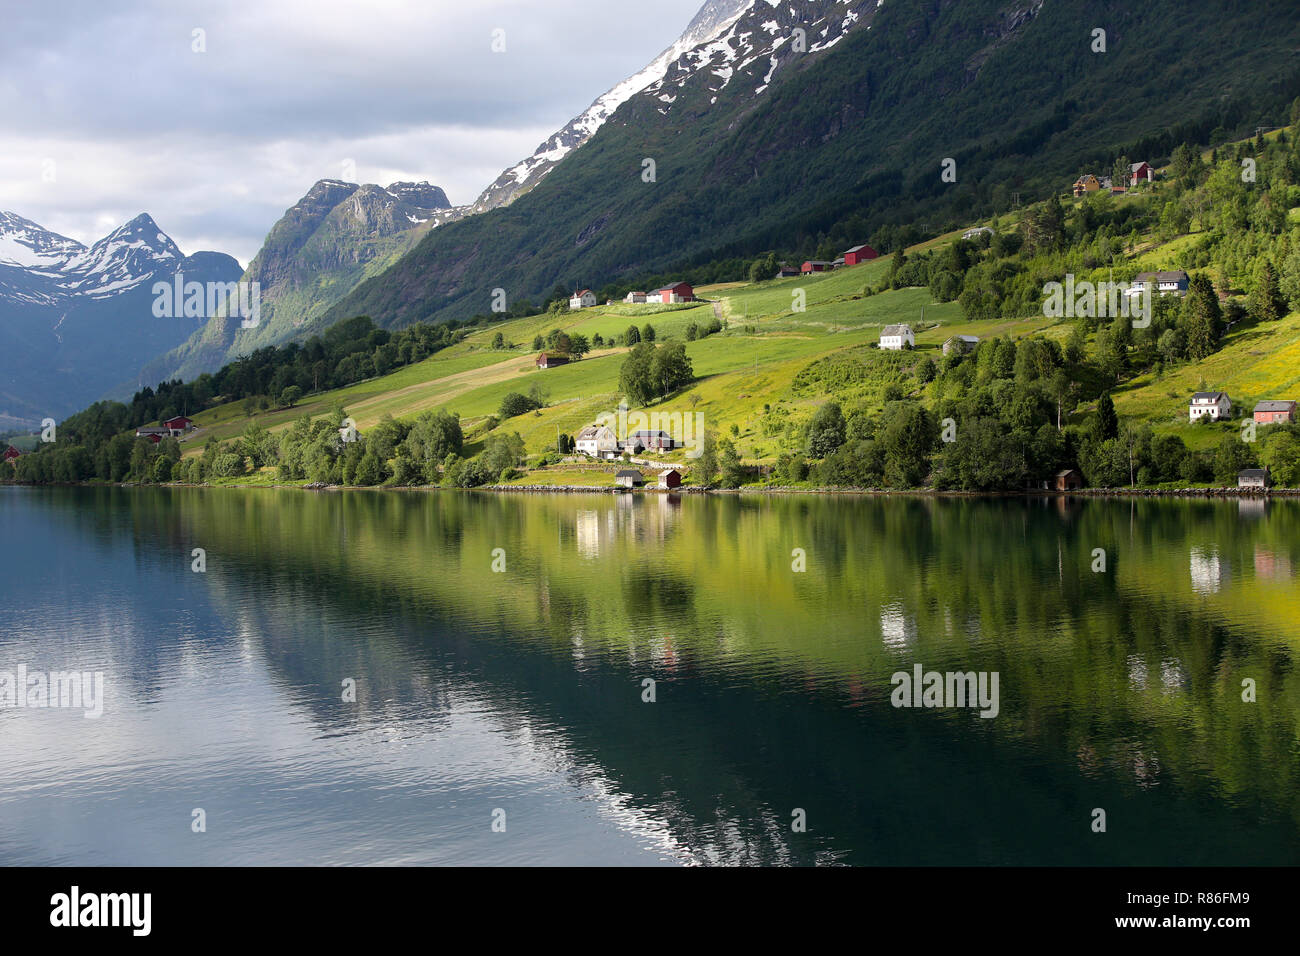 Norway, Olden, landscape view of residential area in fjord. Stock Photo